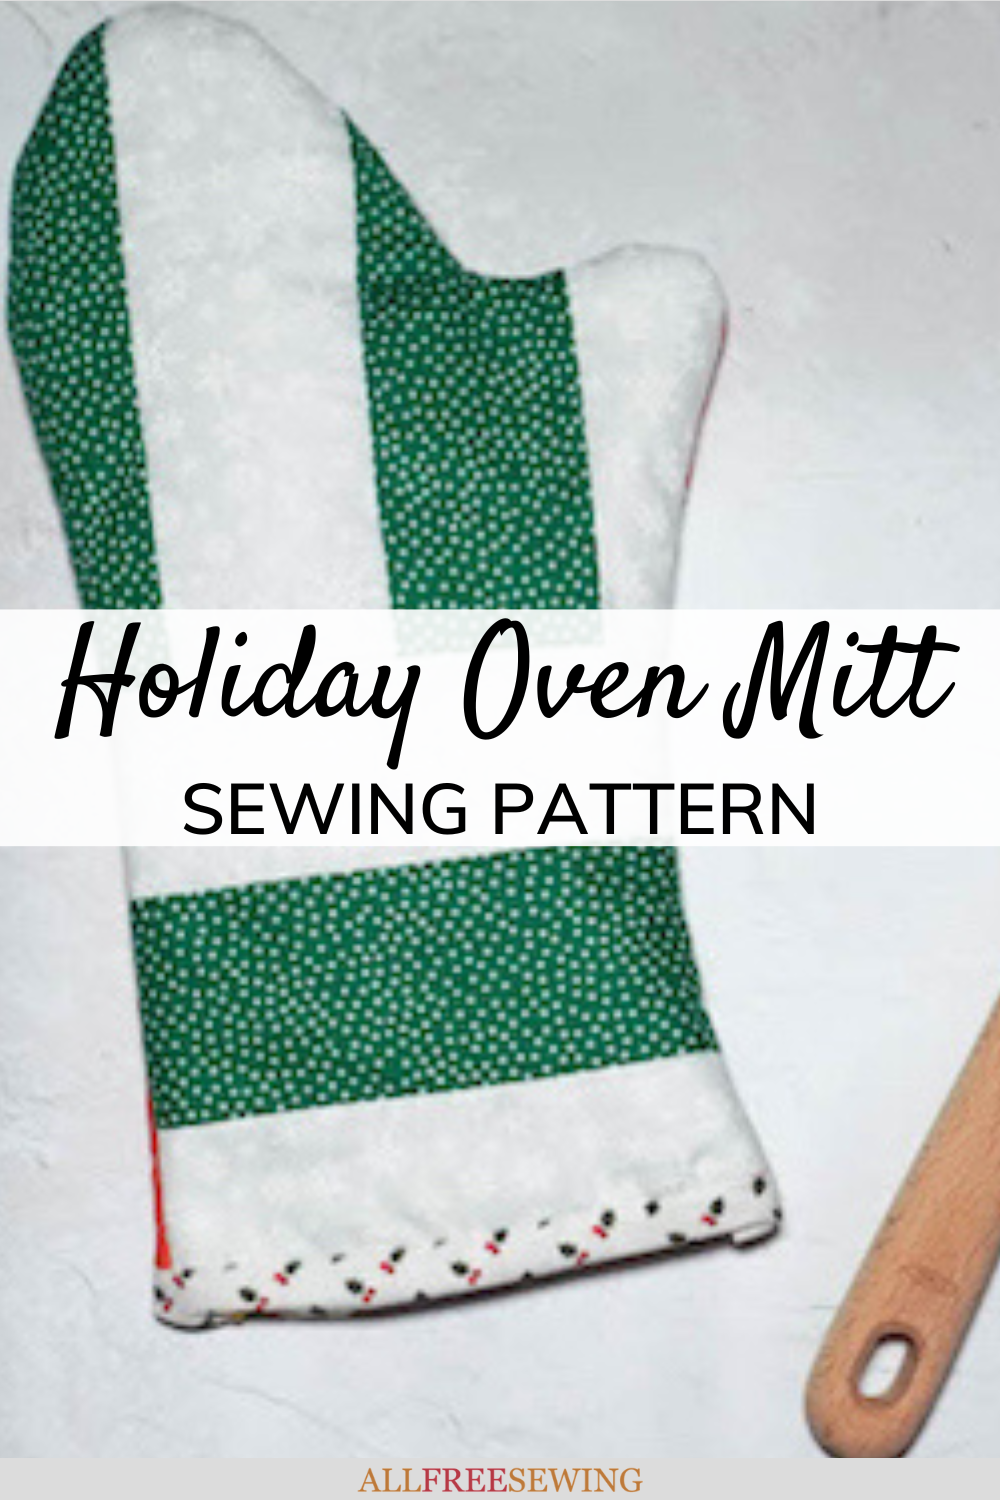 Holiday Oven Mitt Sewing Pattern (Free) | AllFreeSewing.com